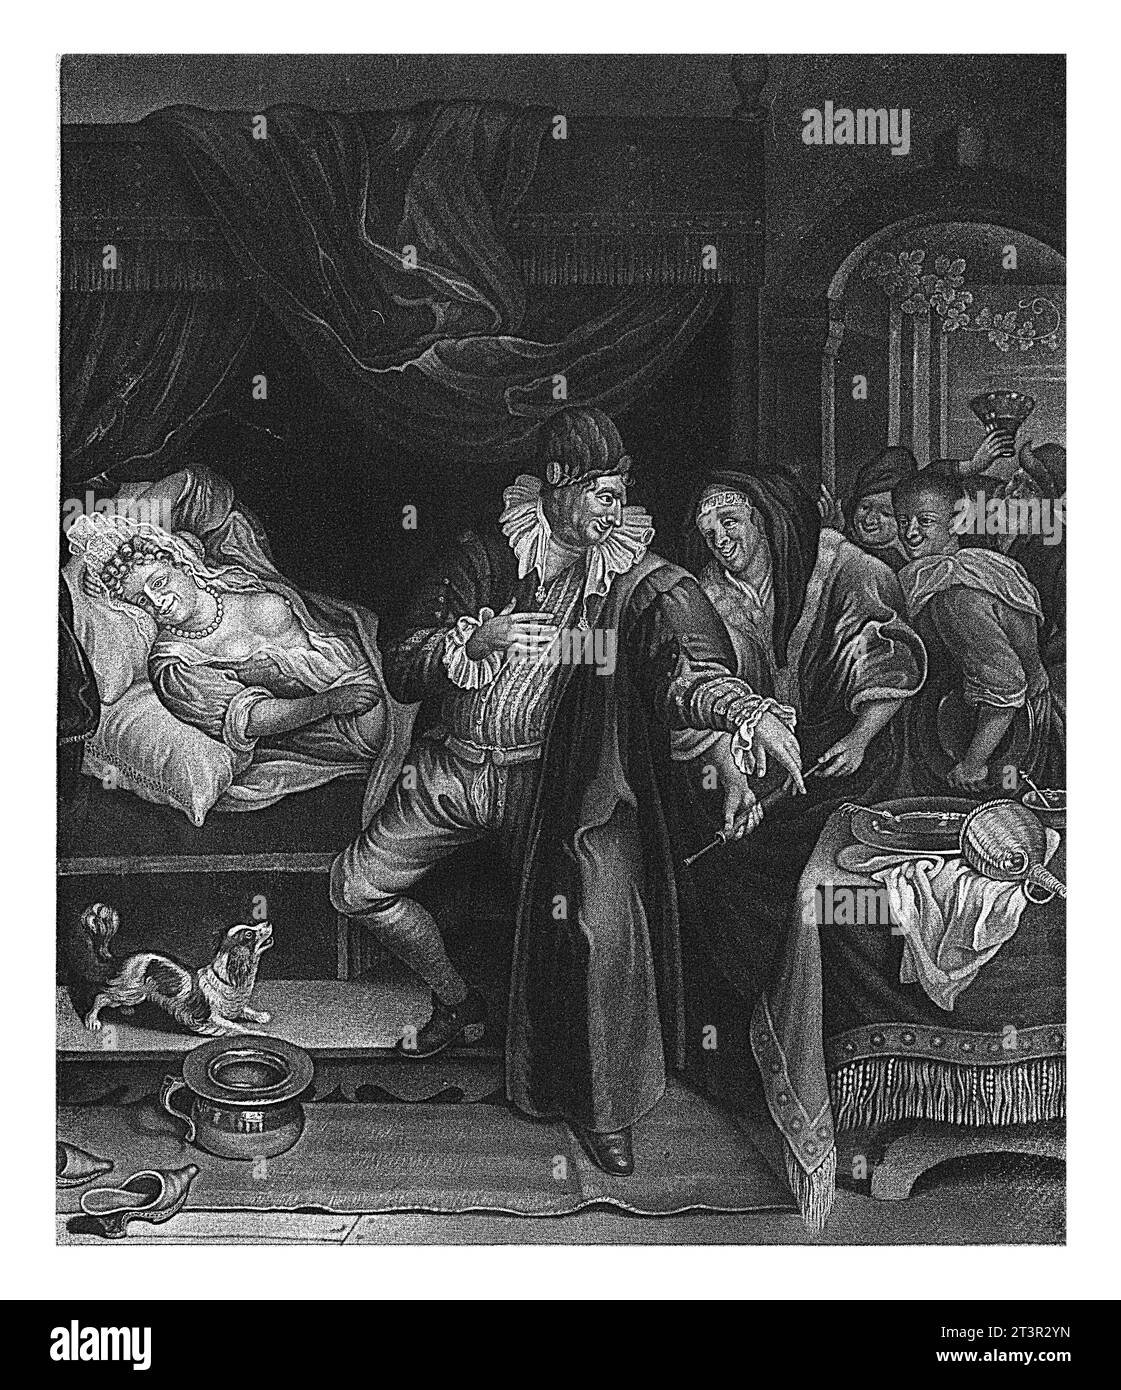 Sickbed, Abraham de Blois, after Jan Havicksz. Steen, 1679 - 1726 A doctor visits a sick woman on her bed. There is a chamber pot next to the bed. Stock Photo